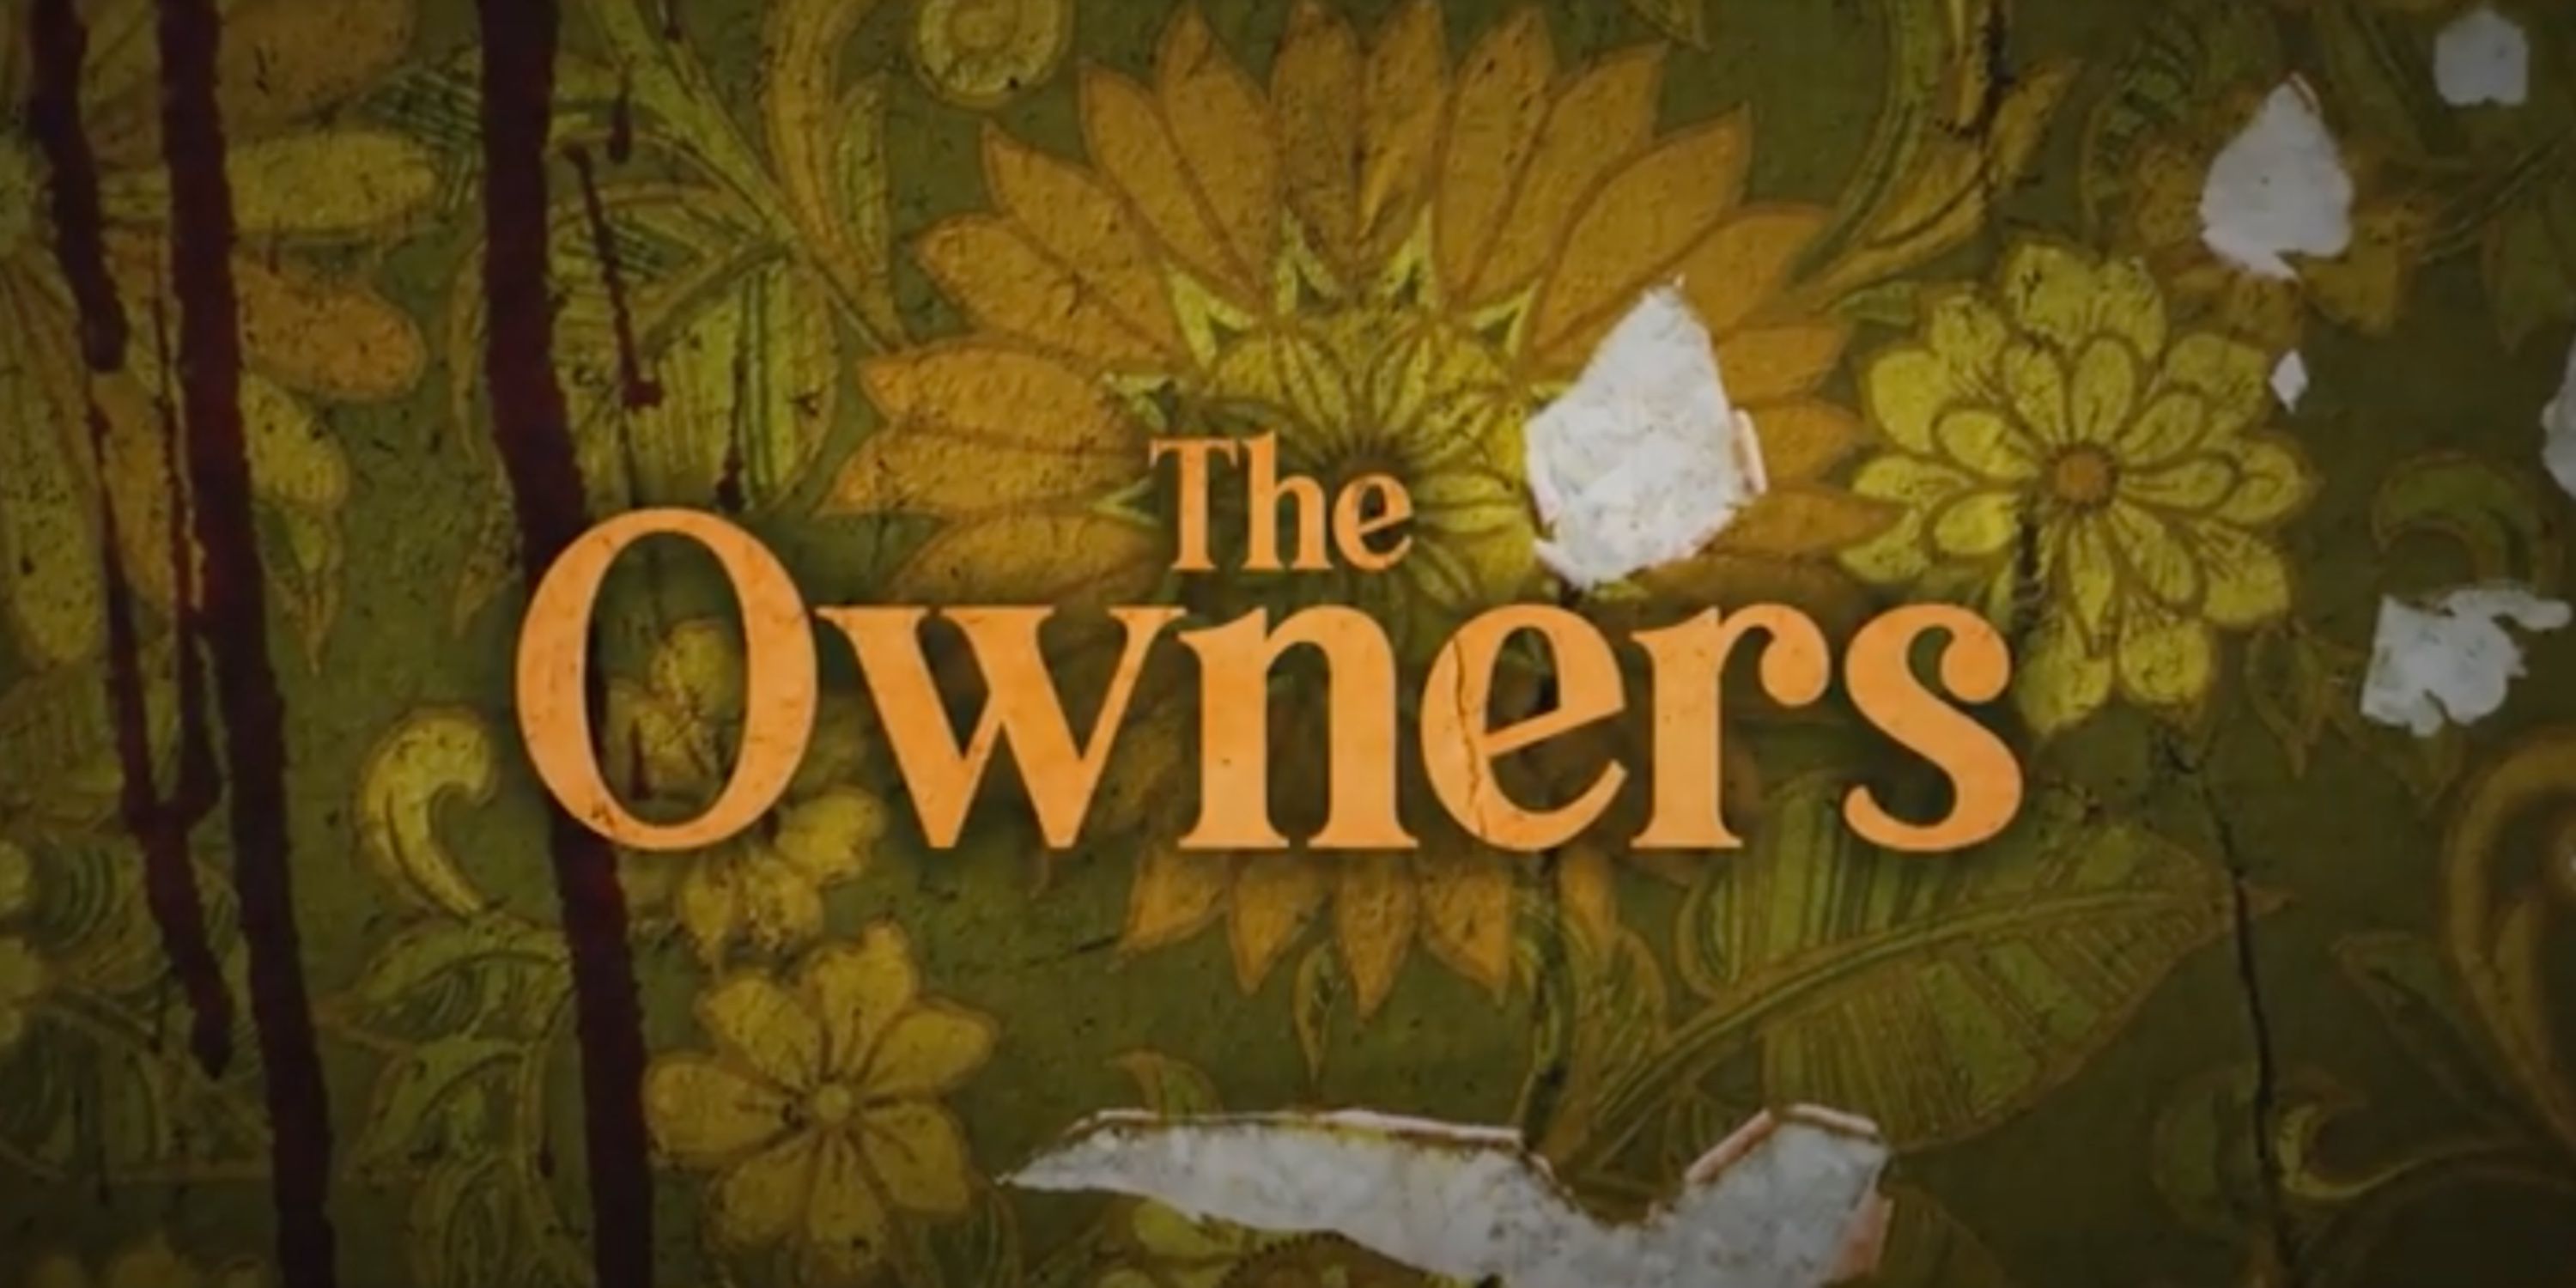 The Owners Movie